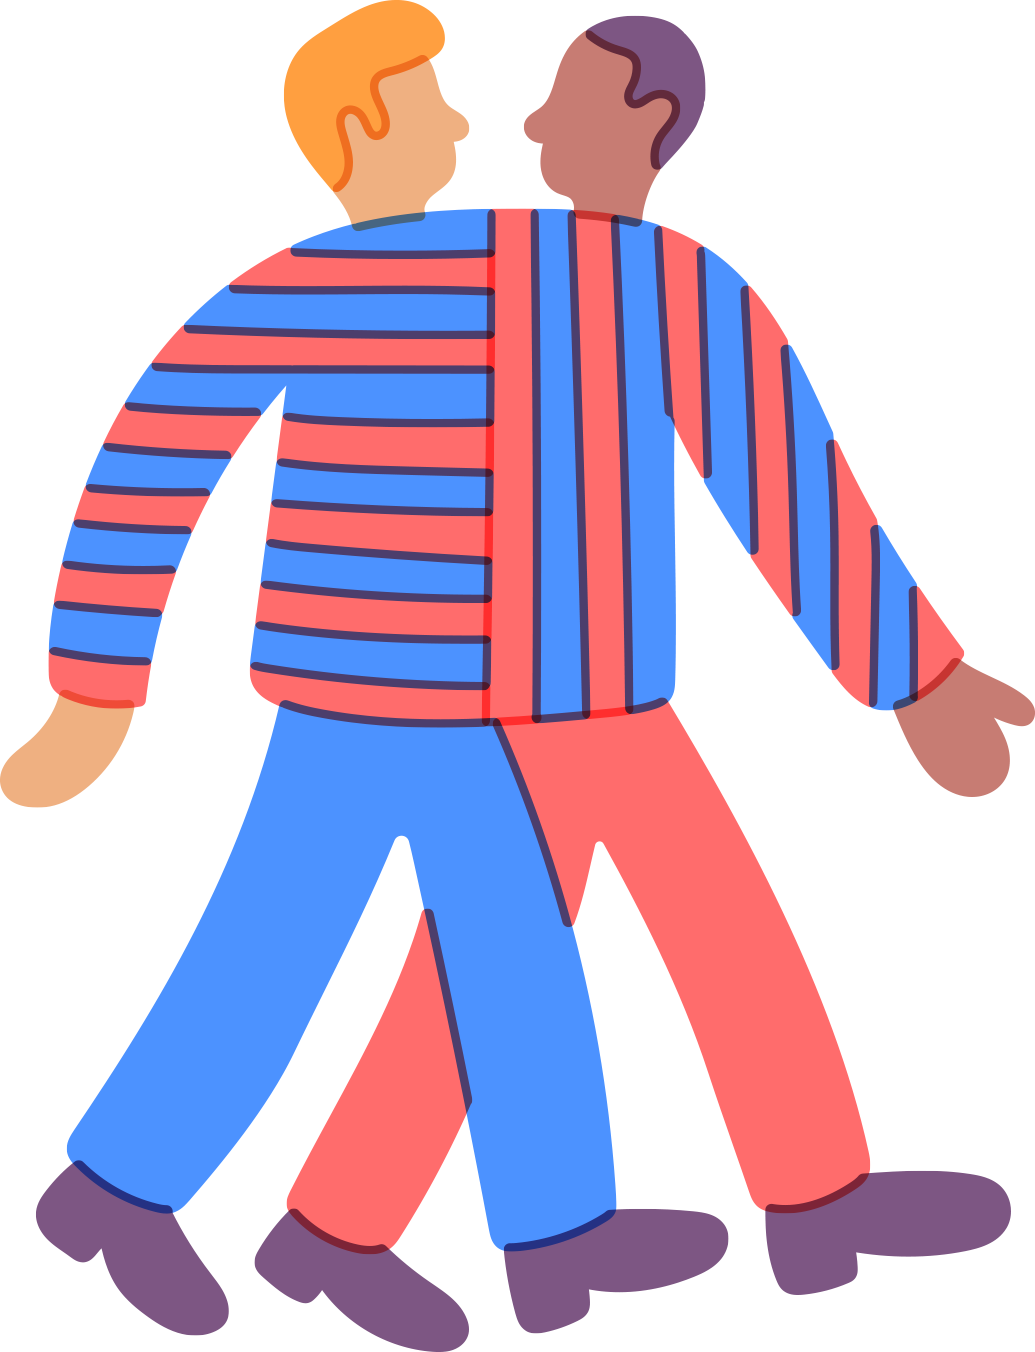 illustration of two individuals in blue and red outfits stitched together and walking in unison